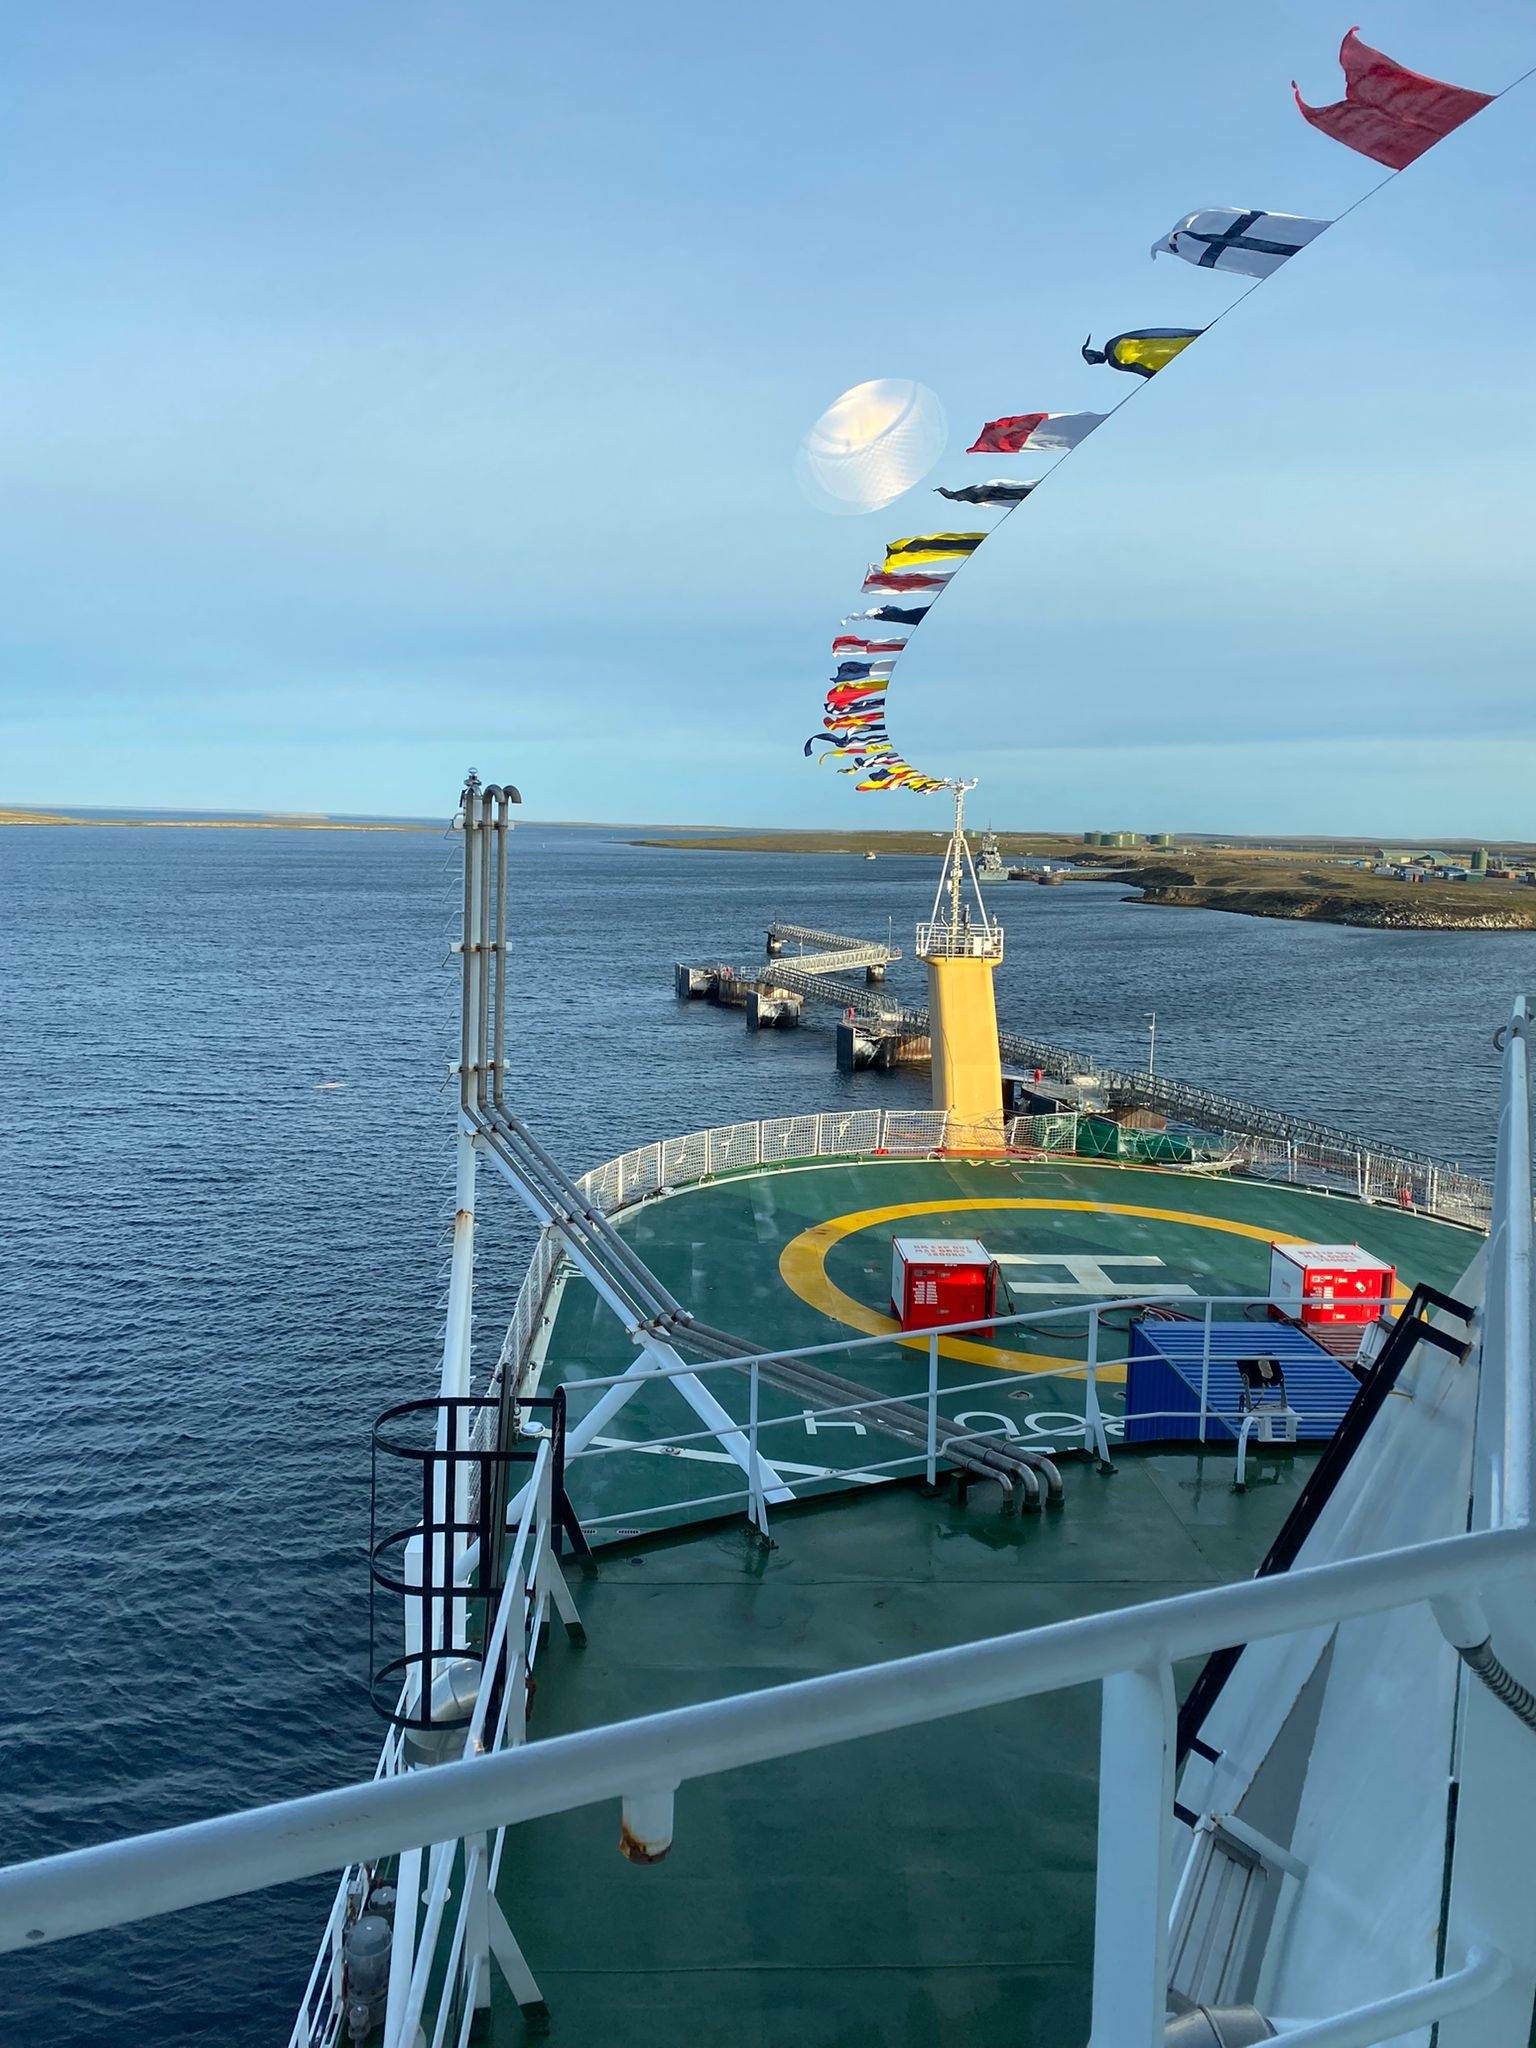 This picture looks out over the helideck of a ship. There are a line of flags with different colours and patterns that are streaming in the wind over the helideck